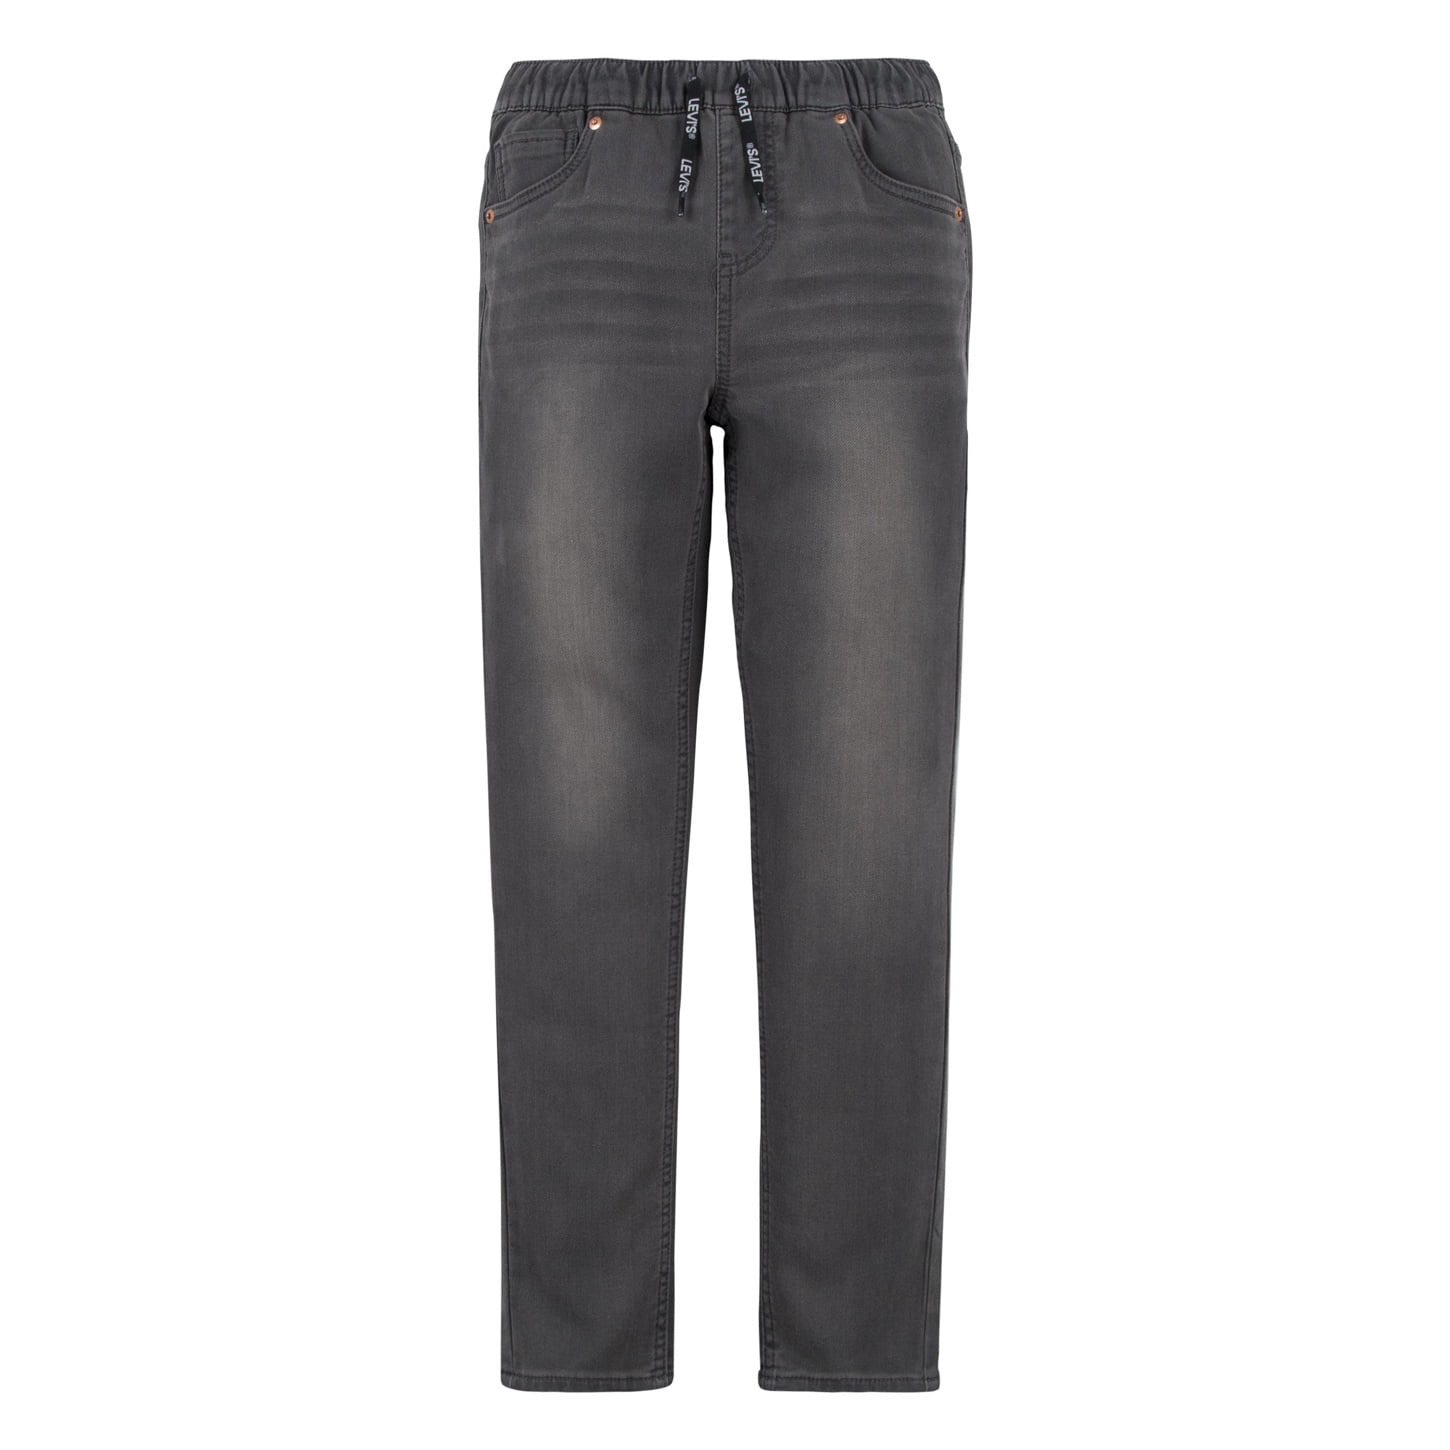 Levi's Boys Skinny Fit Pull On Jeans, Sizes 4-20 